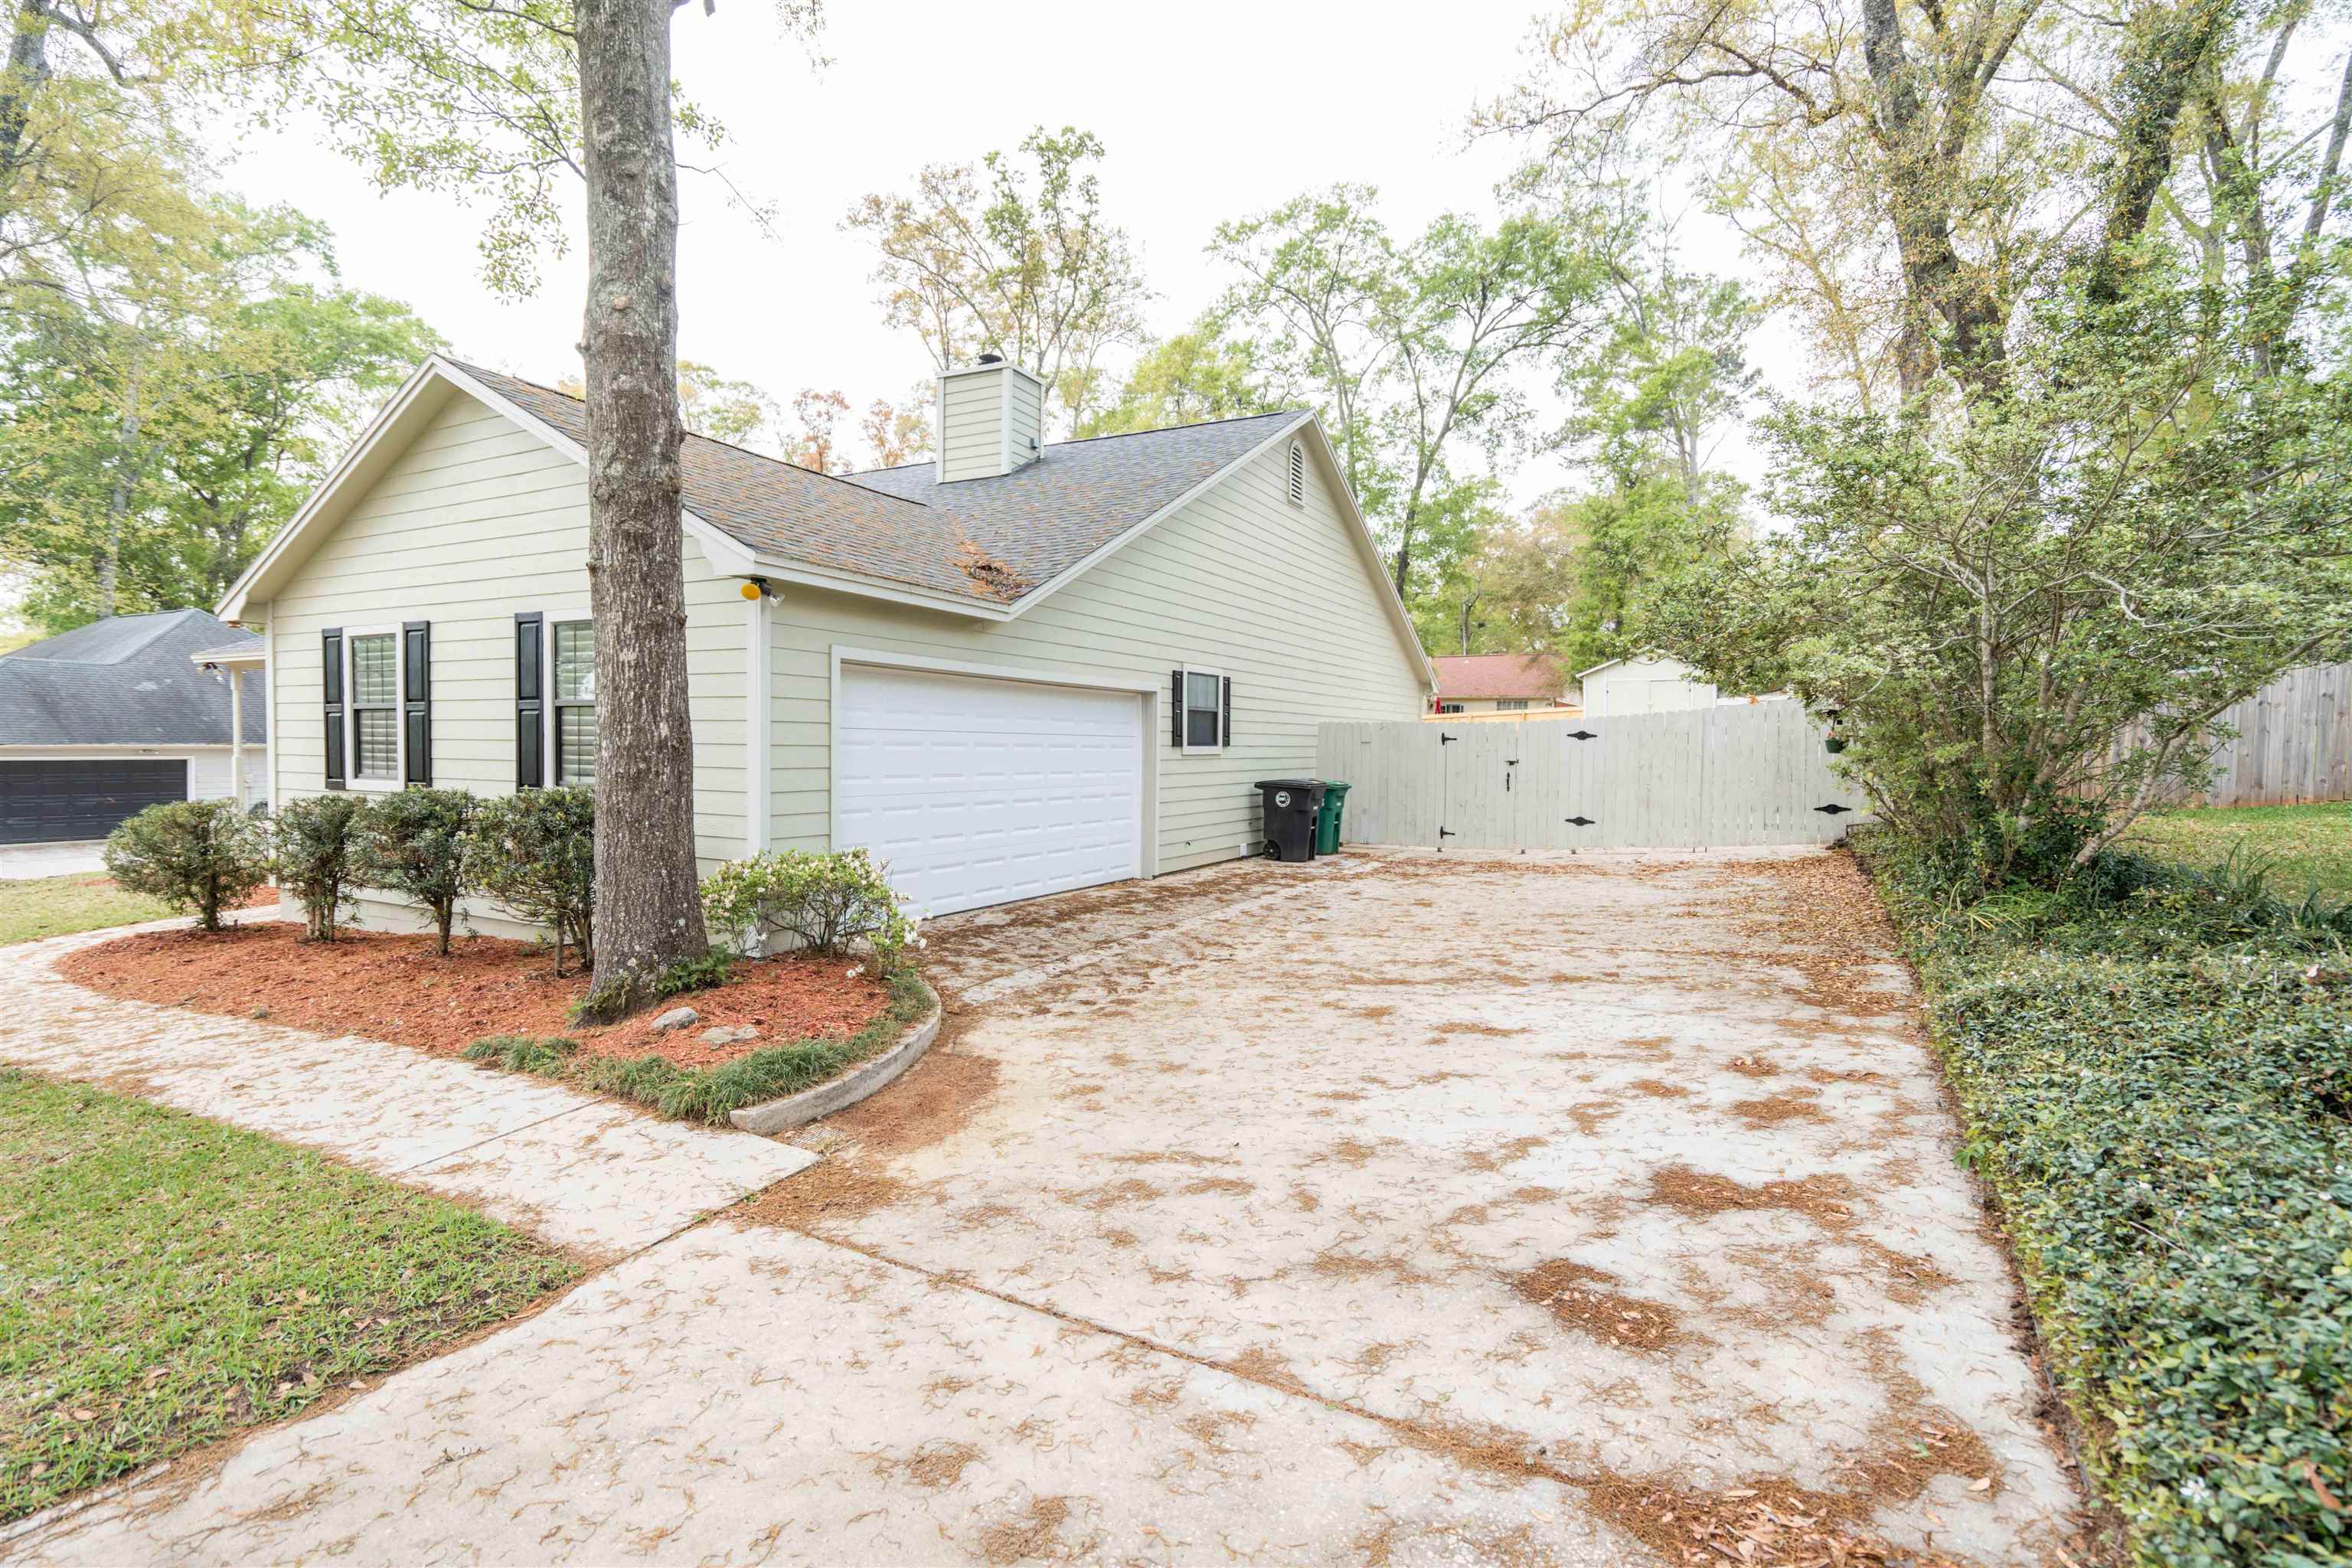 1406 Avondale Way,TALLAHASSEE,Florida 32317,3 Bedrooms Bedrooms,2 BathroomsBathrooms,Detached single family,1406 Avondale Way,369936